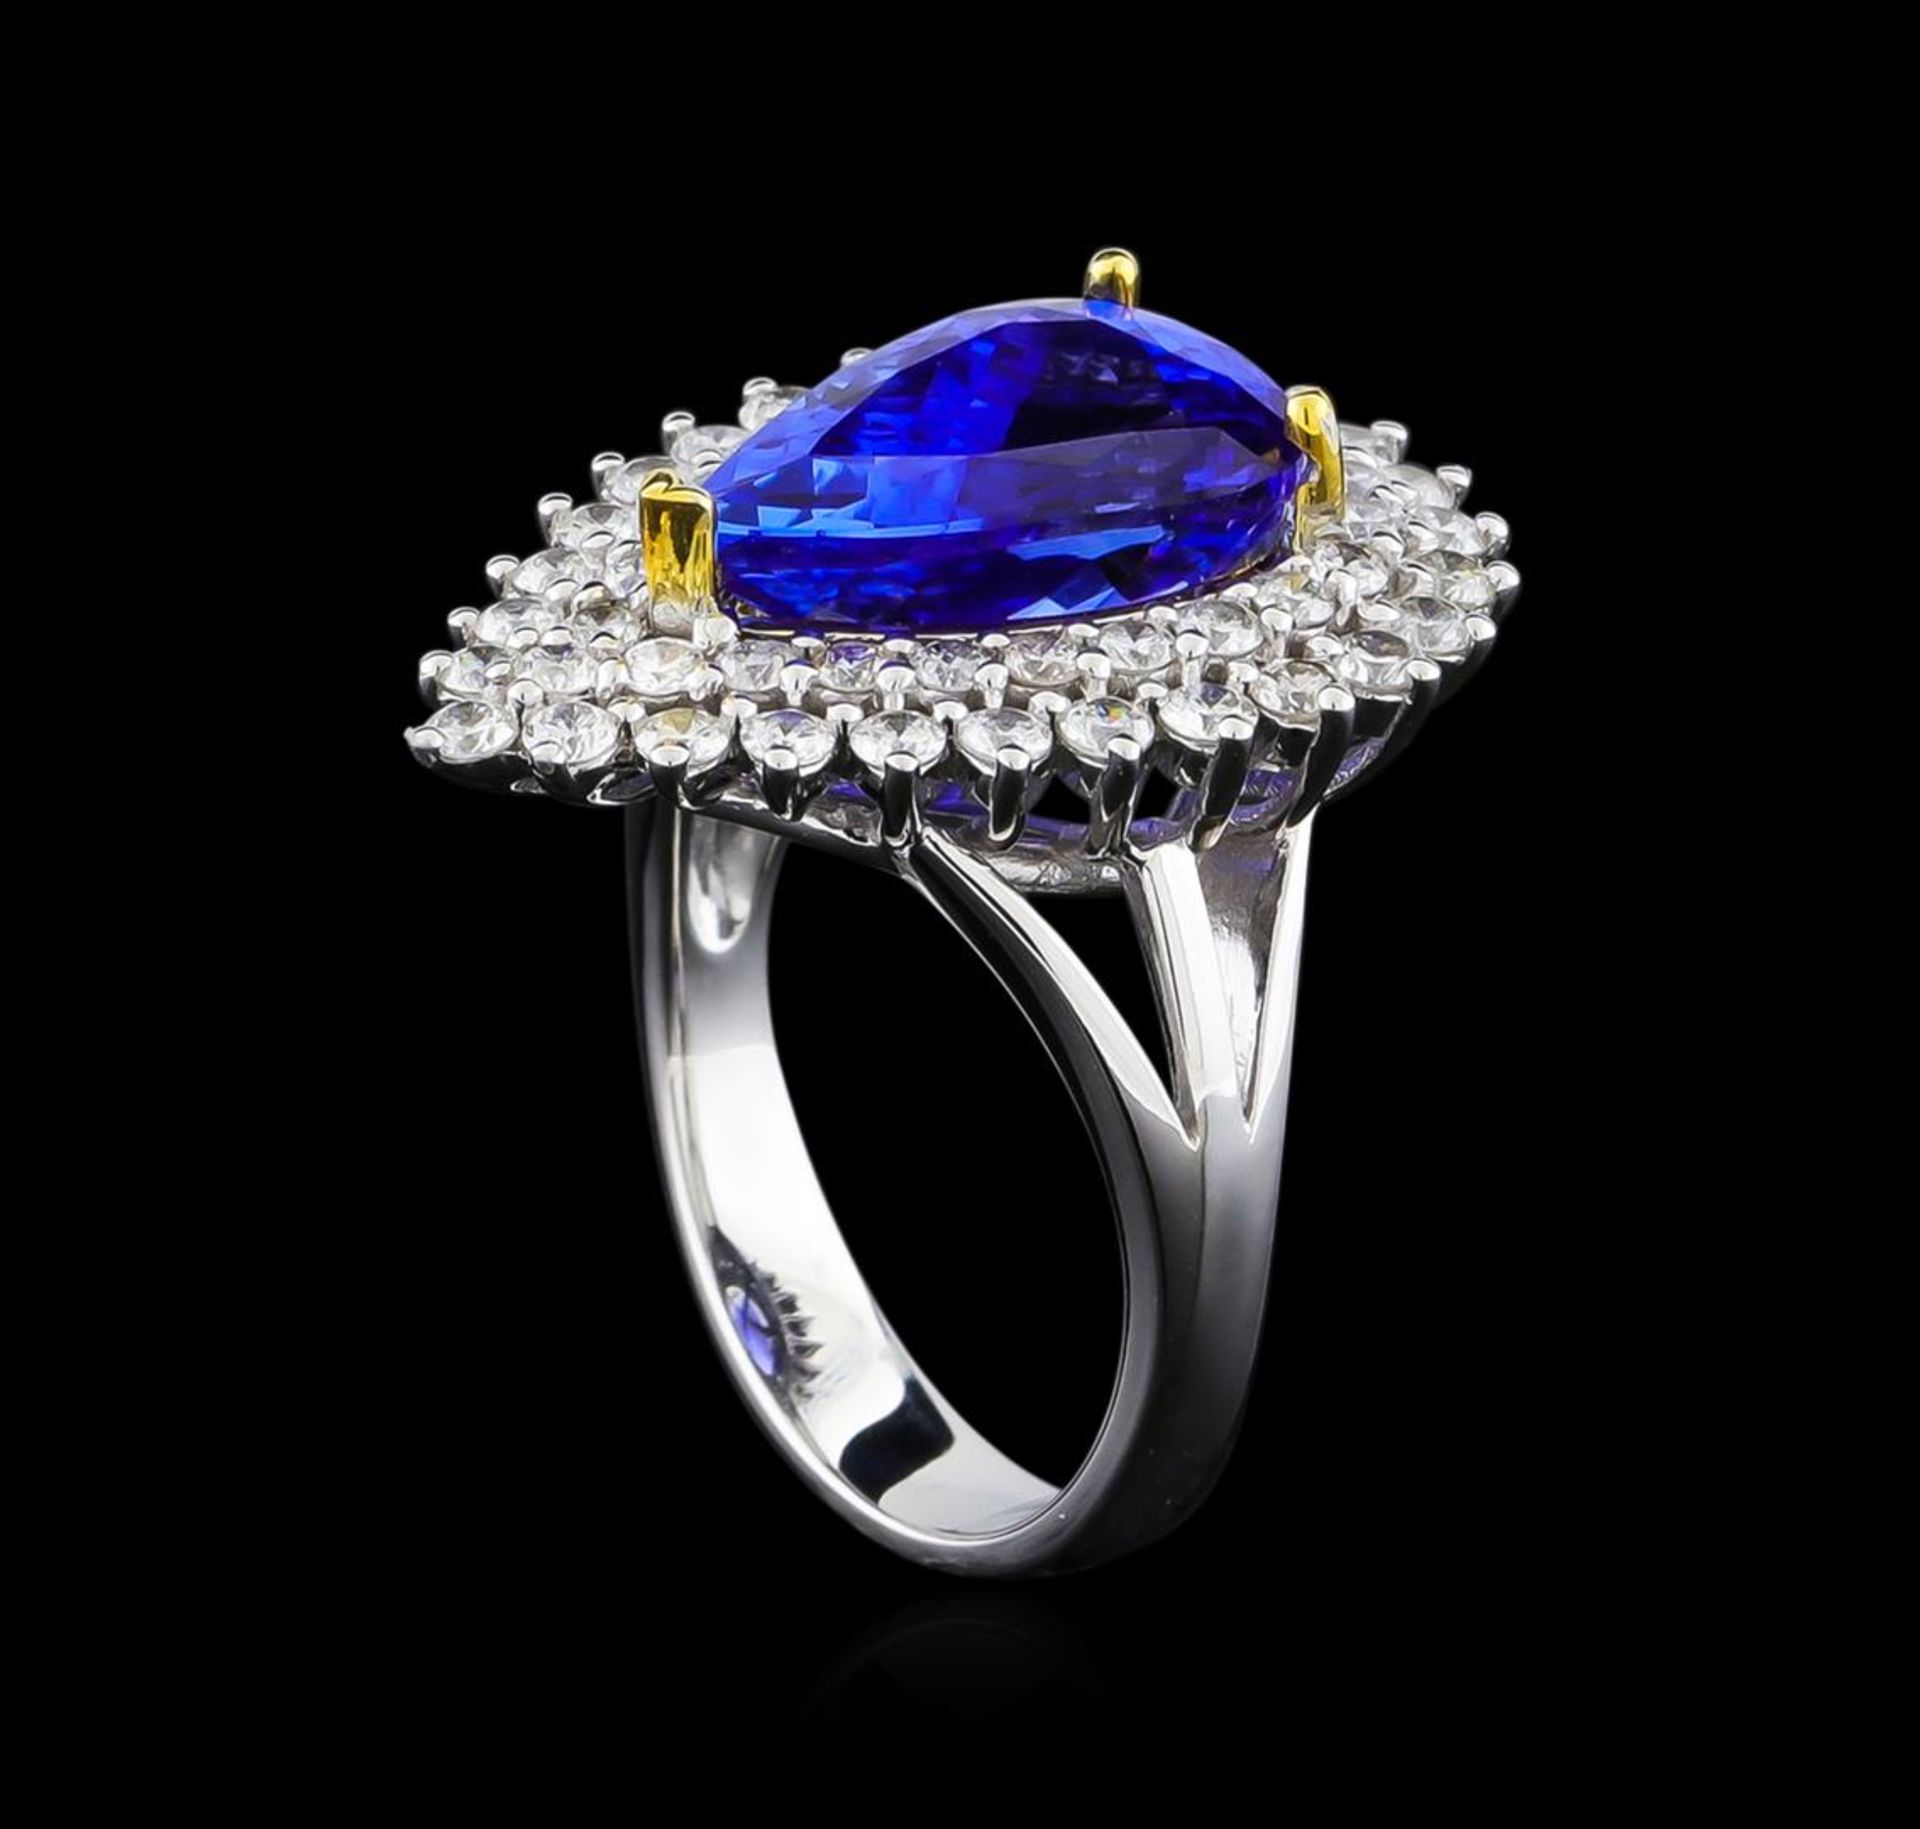 14KT Two-Tone Gold 4.13 ctw Tanzanite and Diamond Ring - Image 4 of 5